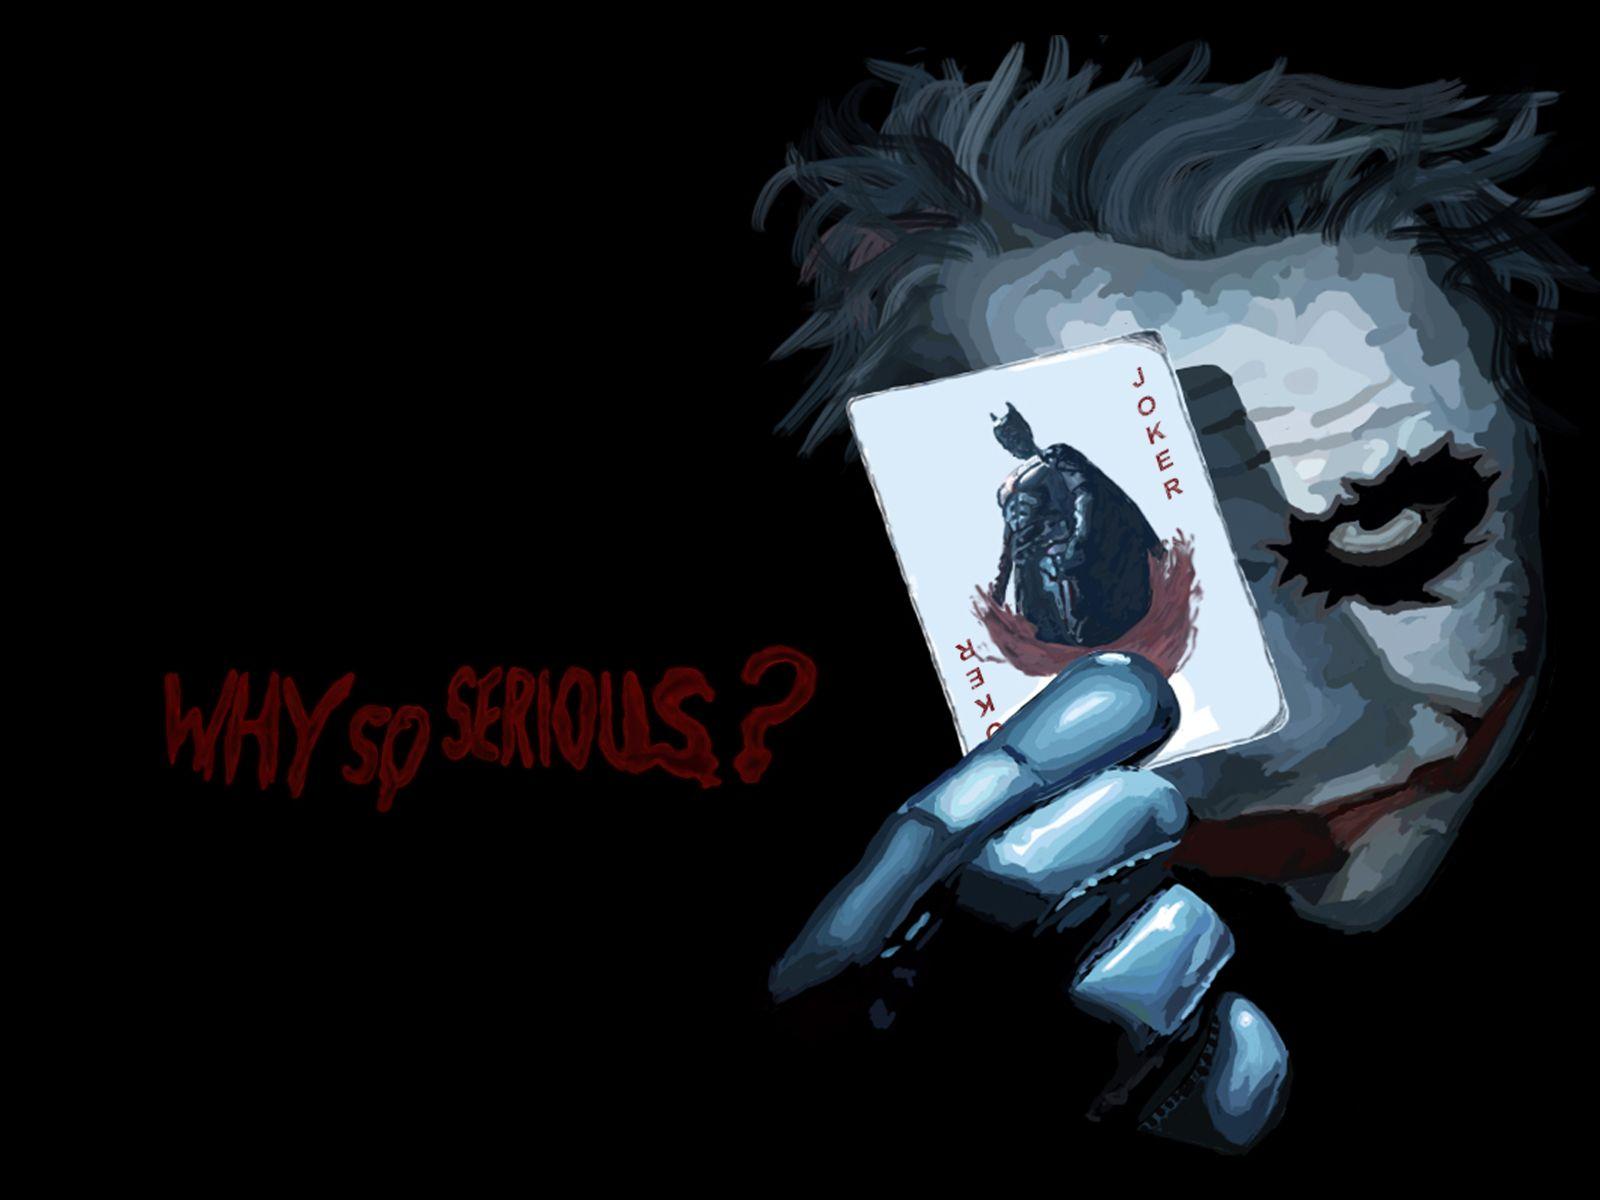 The Joker Wallpapers Why So Serious - Wallpaper Cave